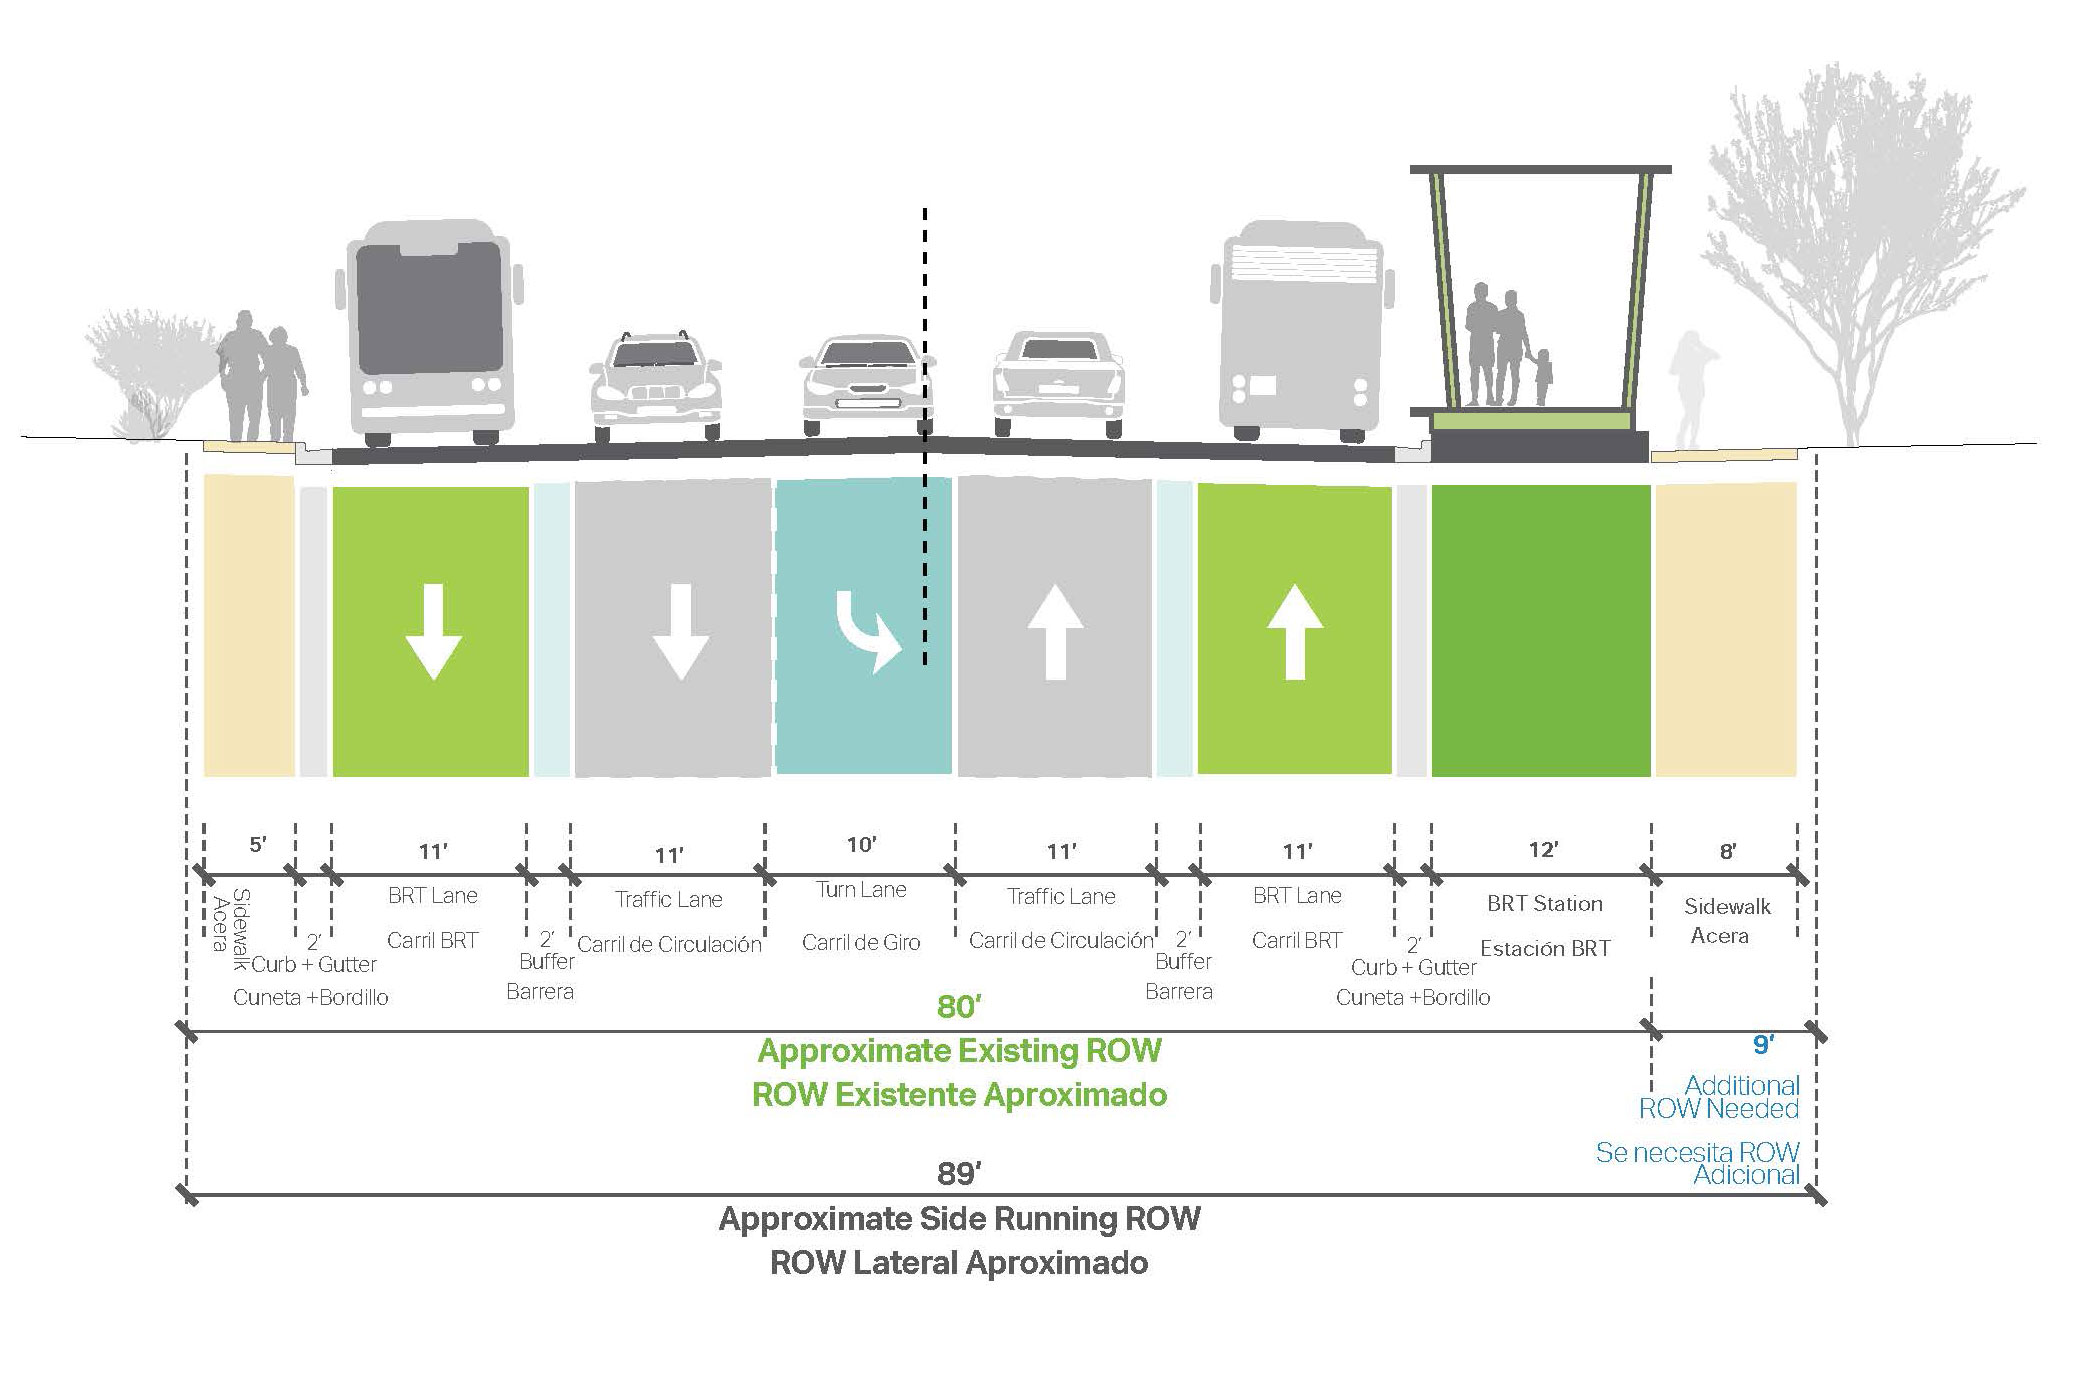 Feature of Center Dedicated Bus Lanes